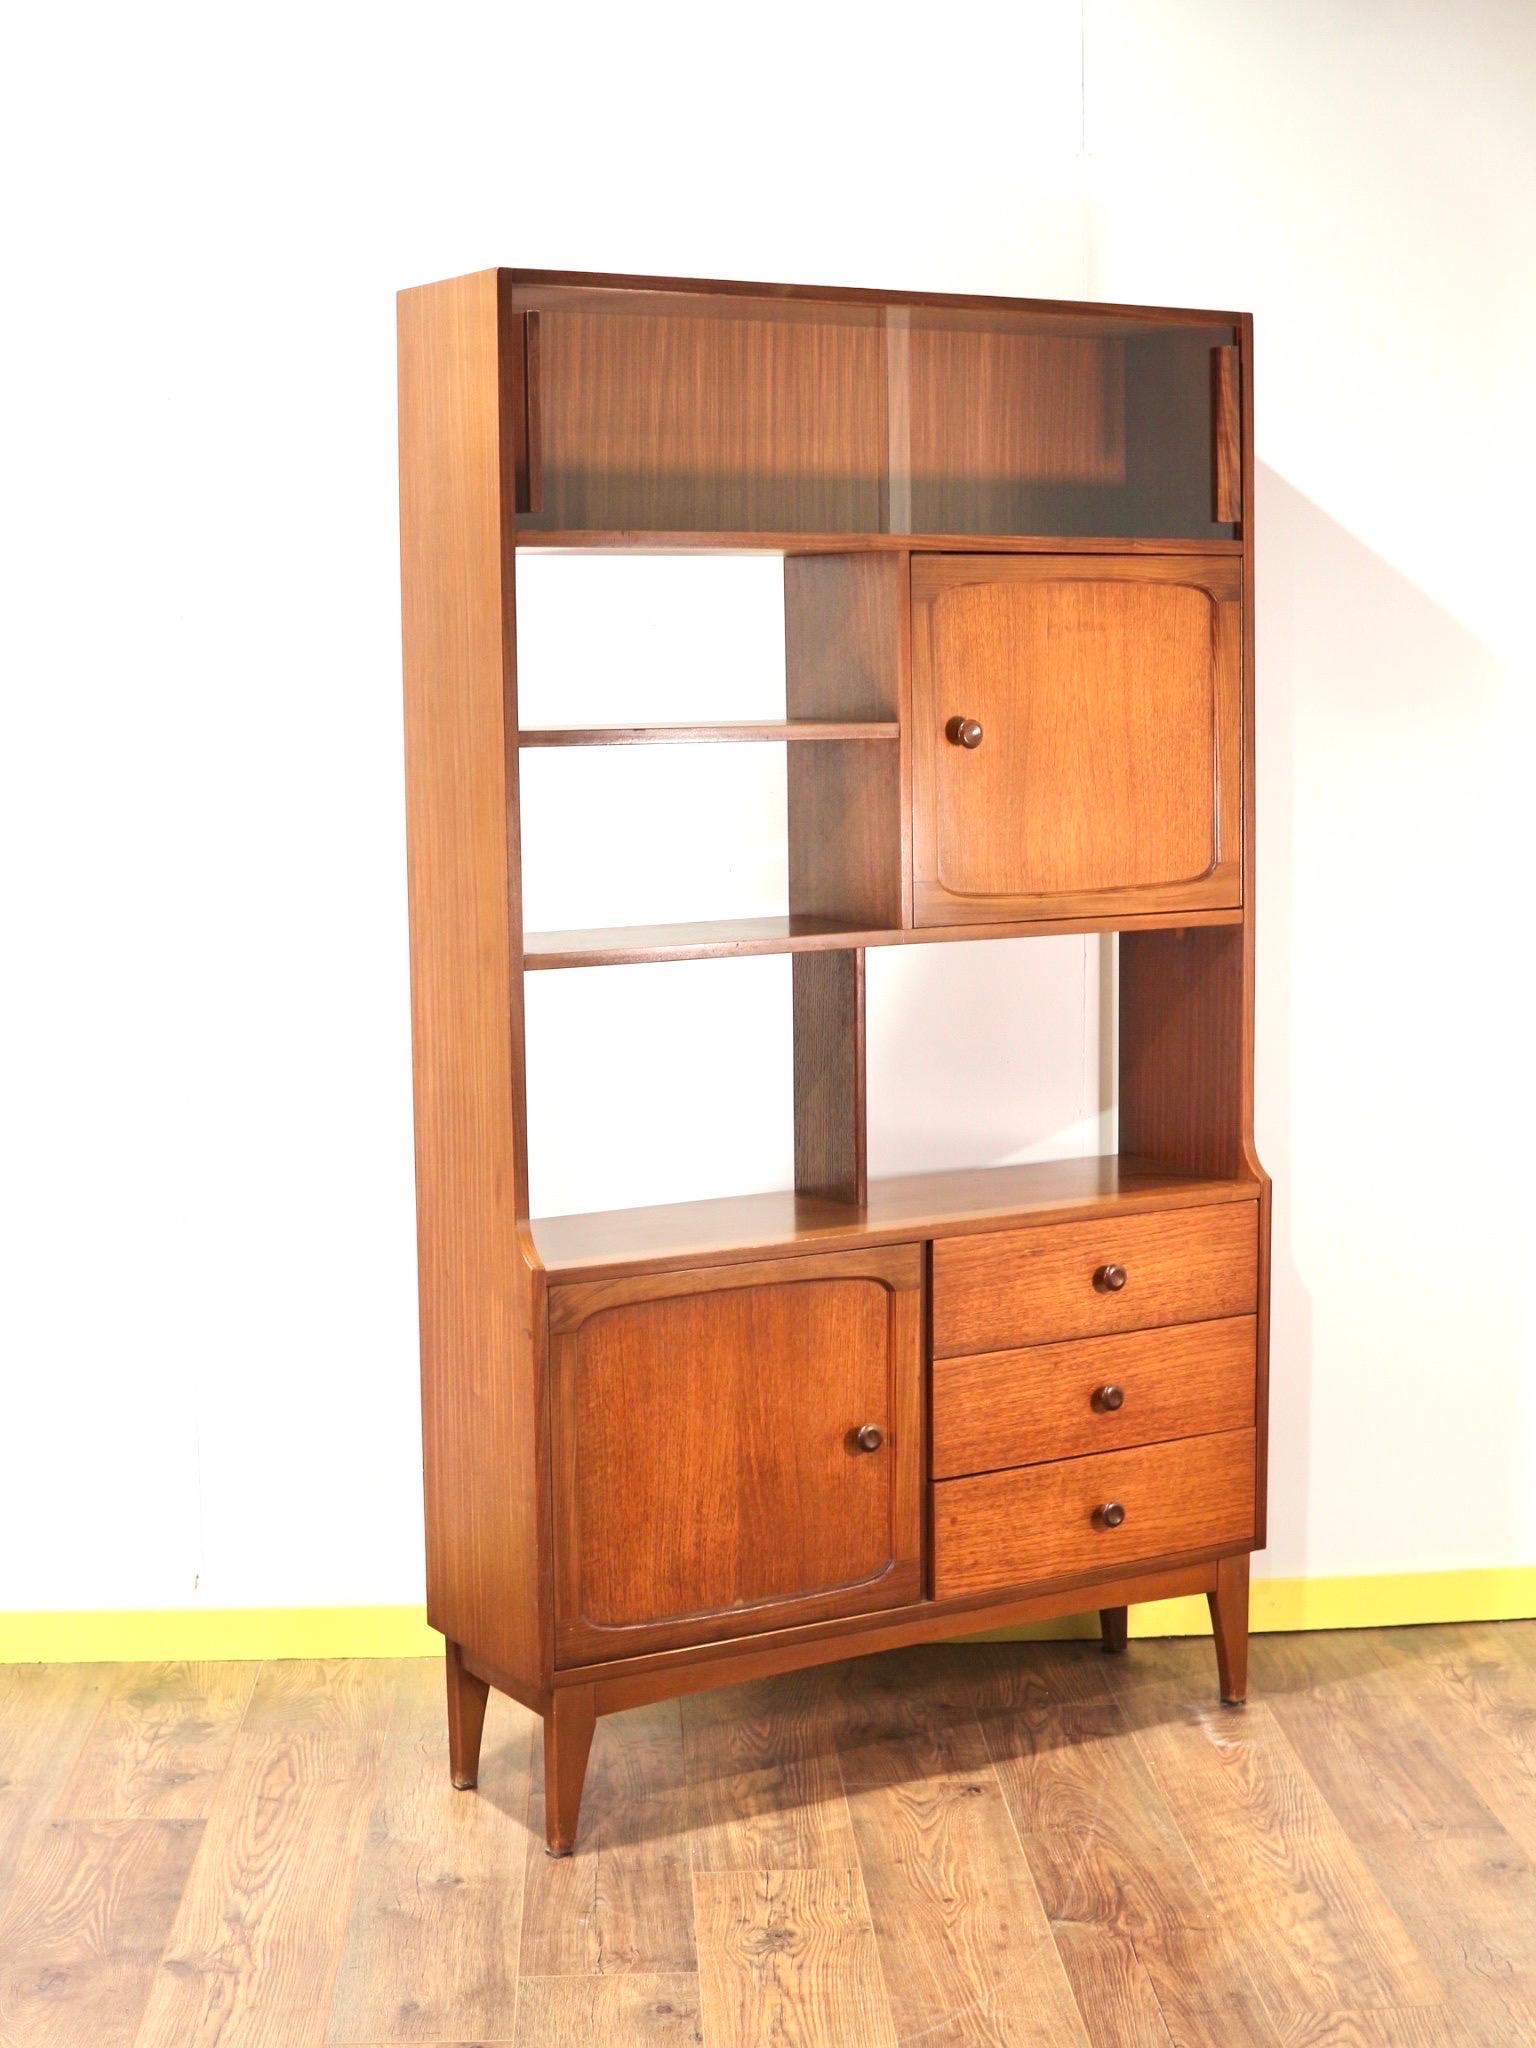 This retro cabinet by Stonehill for their stateroom range is a great way to store books, show off pottery and generally look great. Plenty of storage space and stylish looks, a must for any space.